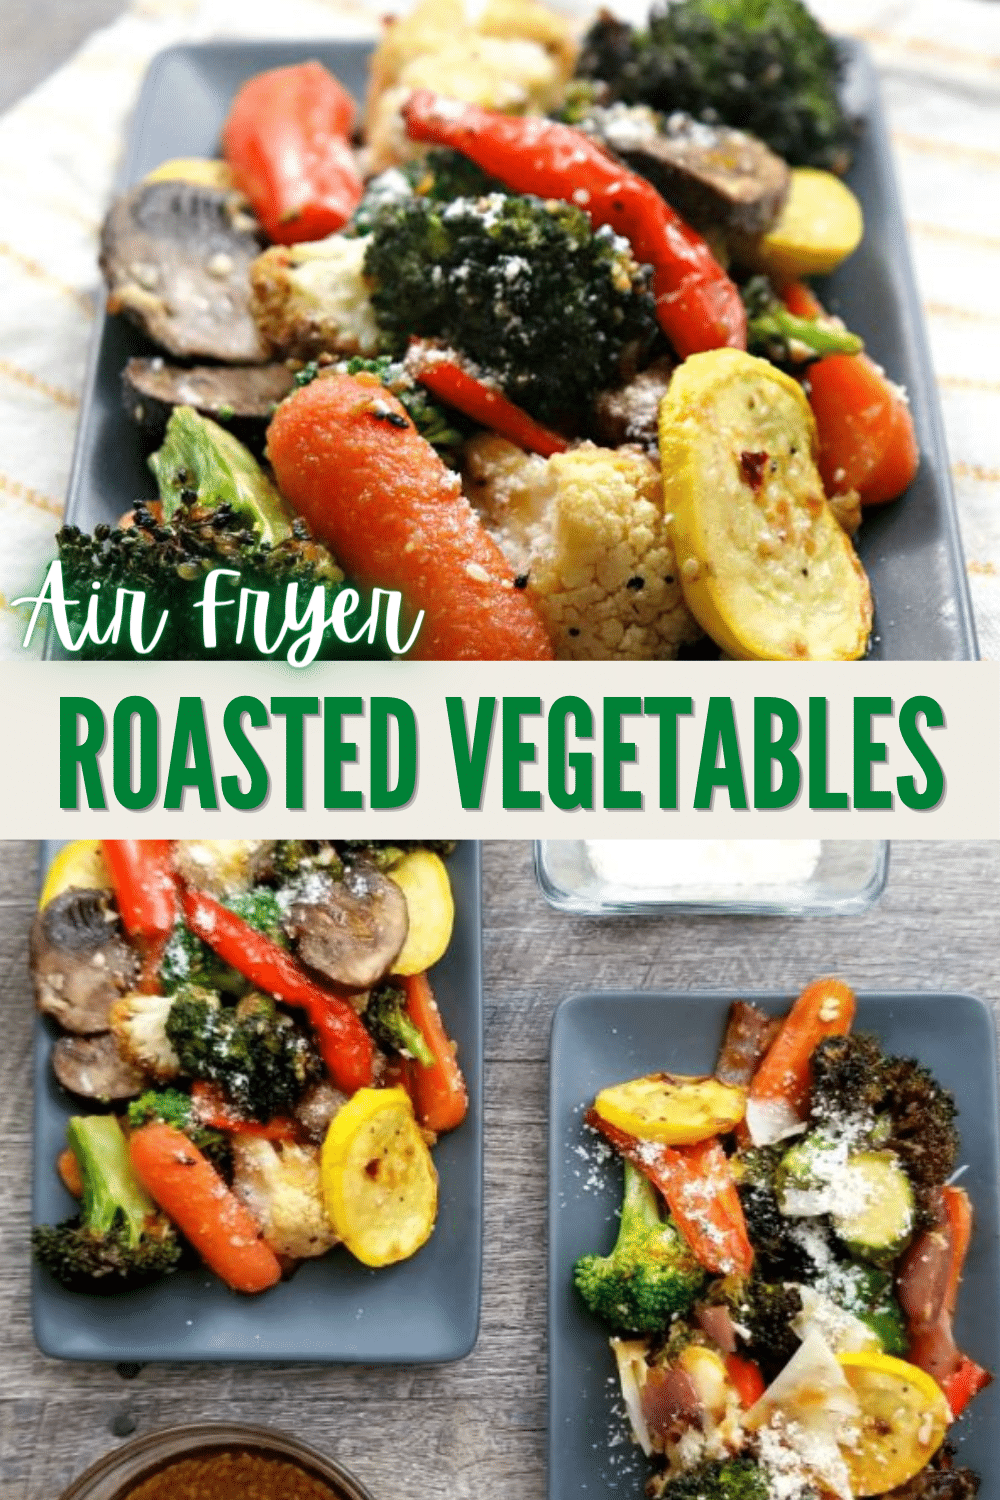 a collage of 2 images of Air Fryer Roasted Vegetables, top part shows the vegetables on a single plate, bottom part shows two servings of vegetables with sauces on the sides